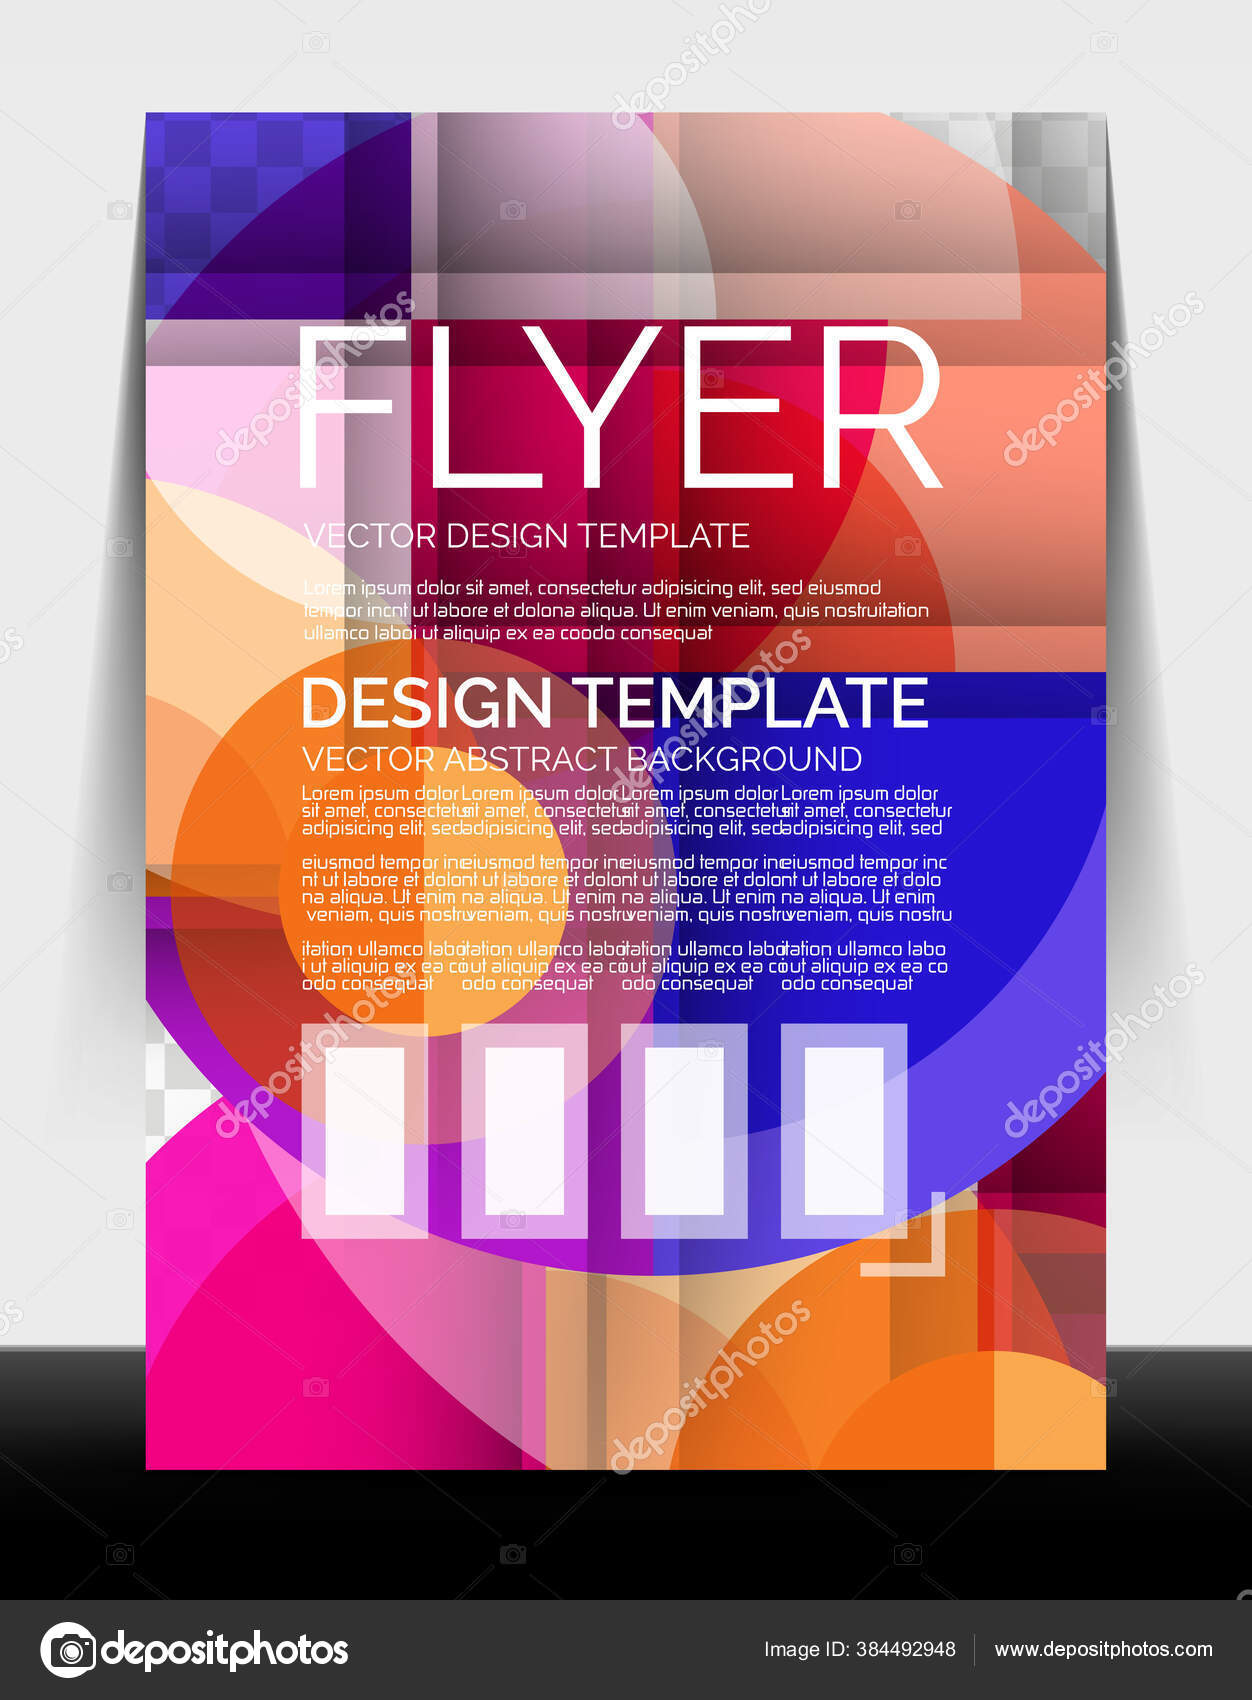 Flyer Annual Report Circle Design Vector Background Print Template Stock Vector C Akomov